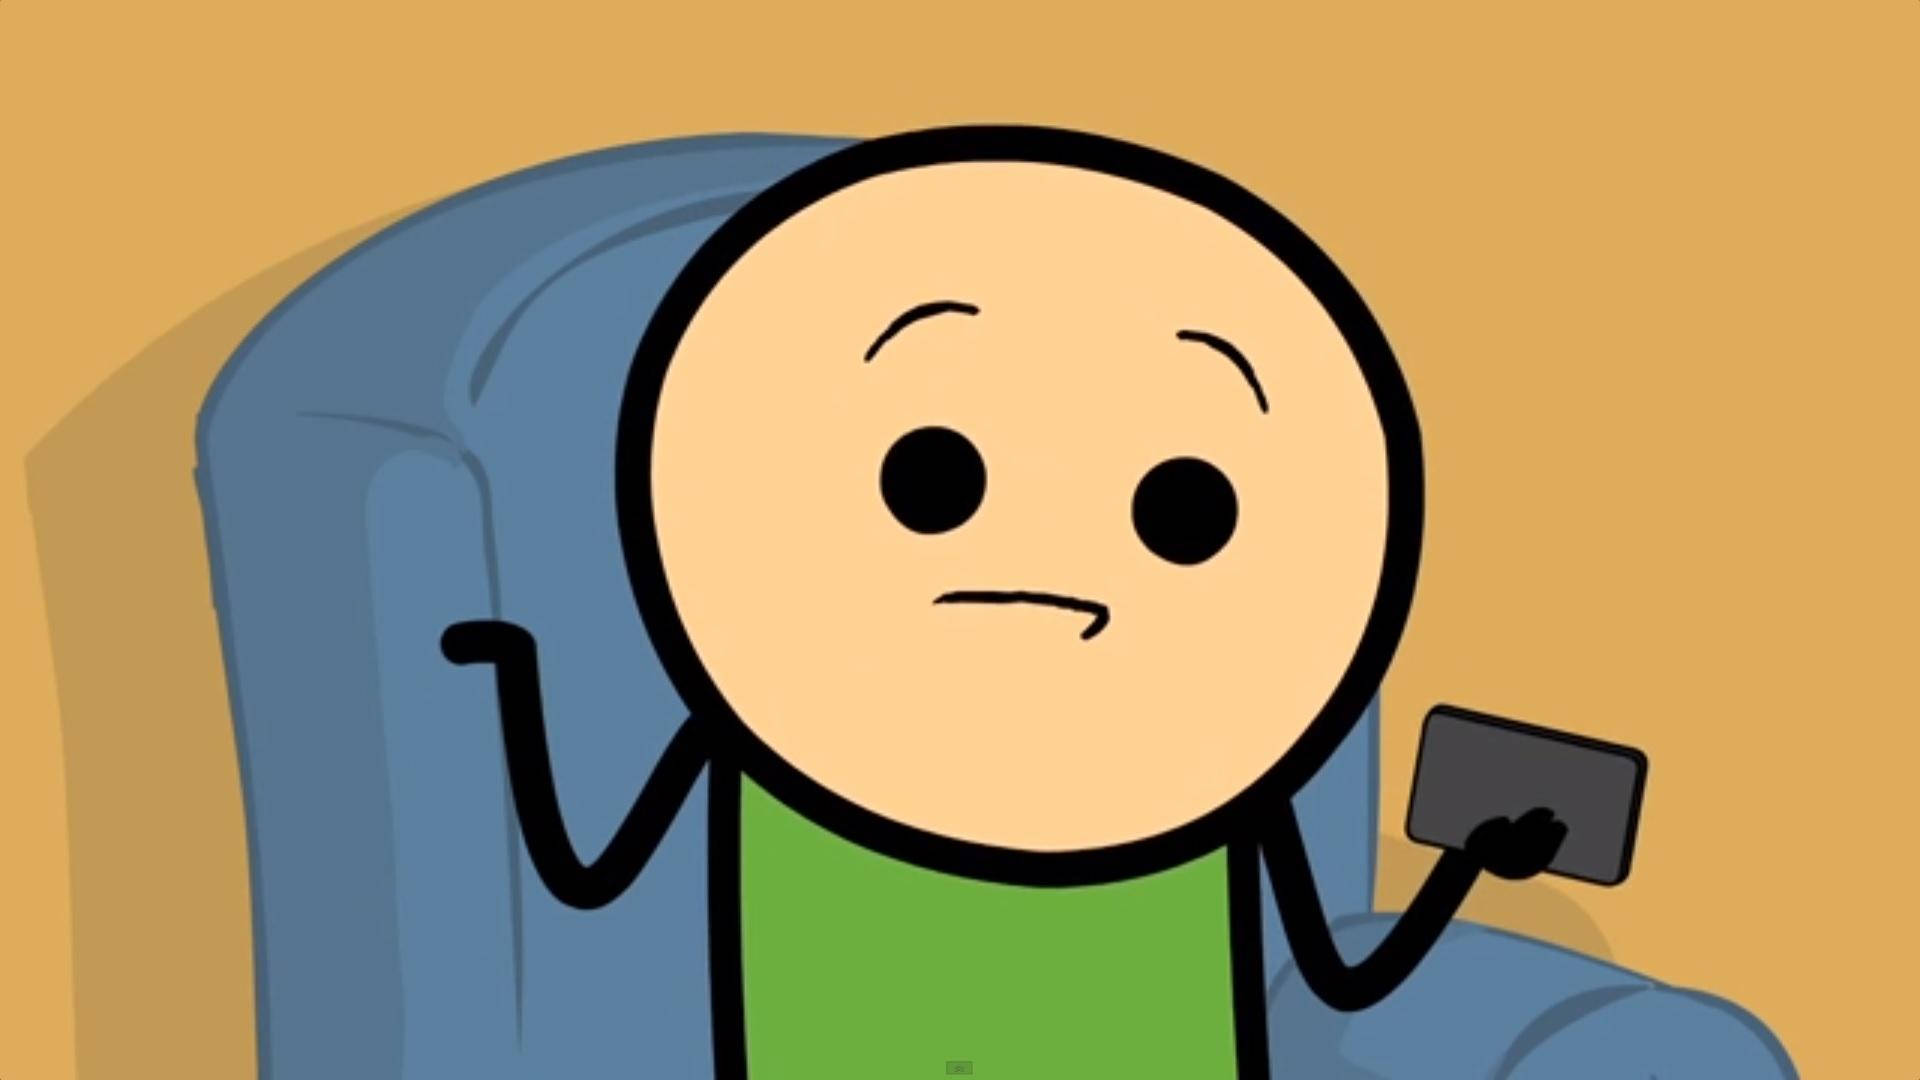 Cyanide And Happiness Shrug Wallpaper